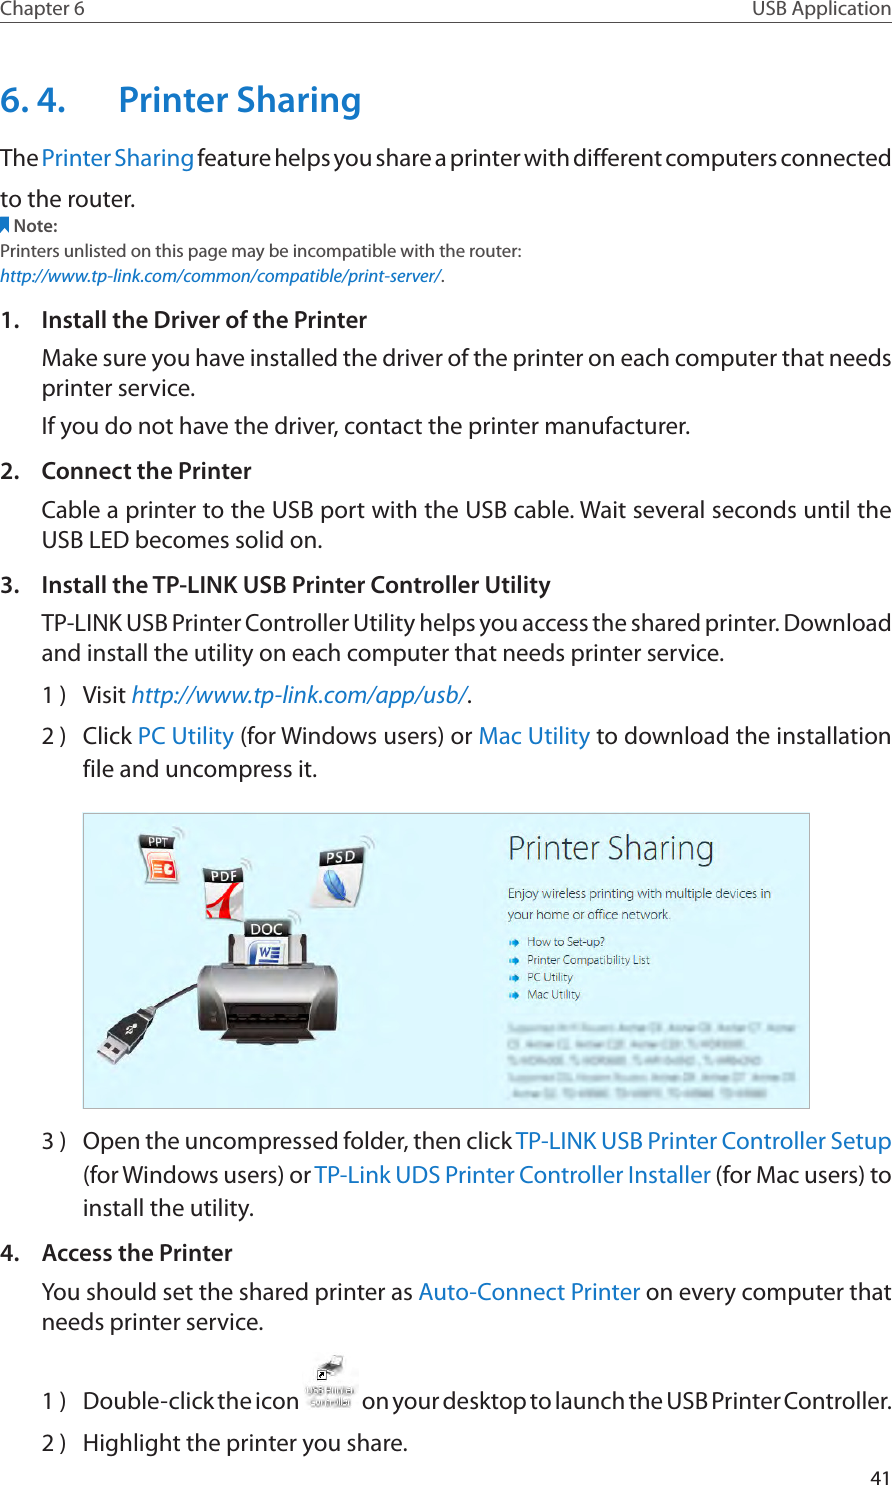 41Chapter 6 USB Application6. 4.  Printer SharingThe Printer Sharing feature helps you share a printer with different computers connectedto the router.Note:Printers unlisted on this page may be incompatible with the router: http://www.tp-link.com/common/compatible/print-server/.1.  Install the Driver of the PrinterMake sure you have installed the driver of the printer on each computer that needs printer service.If you do not have the driver, contact the printer manufacturer.2.  Connect the PrinterCable a printer to the USB port with the USB cable. Wait several seconds until the USB LED becomes solid on.3.  Install the TP-LINK USB Printer Controller UtilityTP-LINK USB Printer Controller Utility helps you access the shared printer. Download and install the utility on each computer that needs printer service.1 )  Visit http://www.tp-link.com/app/usb/.2 )  Click PC Utility (for Windows users) or Mac Utility to download the installation file and uncompress it.3 )  Open the uncompressed folder, then click TP-LINK USB Printer Controller Setup (for Windows users) or TP-Link UDS Printer Controller Installer (for Mac users) to install the utility.4.  Access the PrinterYou should set the shared printer as Auto-Connect Printer on every computer that needs printer service.1 )  Double-click the icon   on your desktop to launch the USB Printer Controller.2 )  Highlight the printer you share.